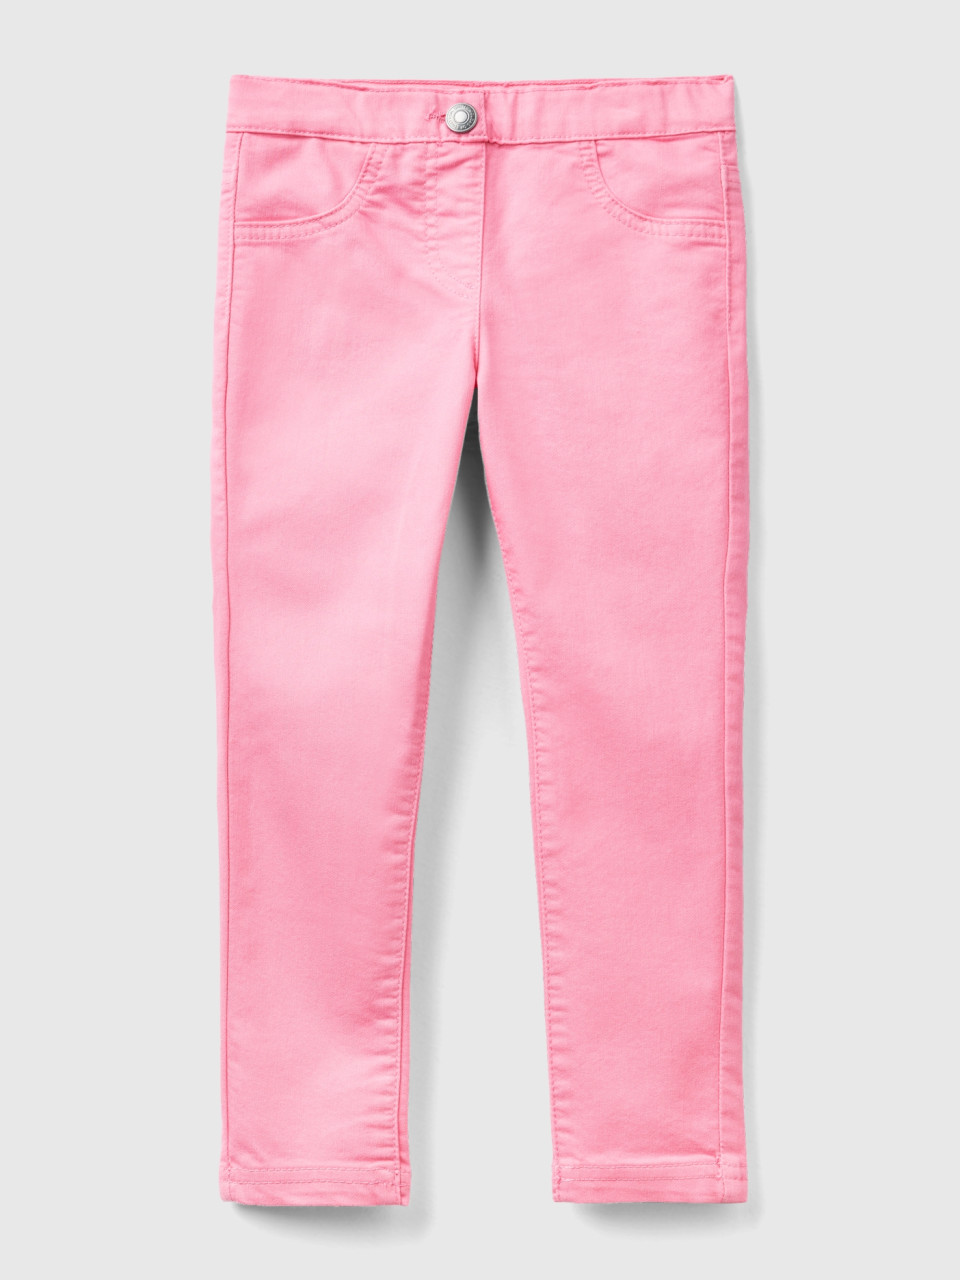 Benetton, Jeggings In Stretch Cotton Blend, Pink, Kids